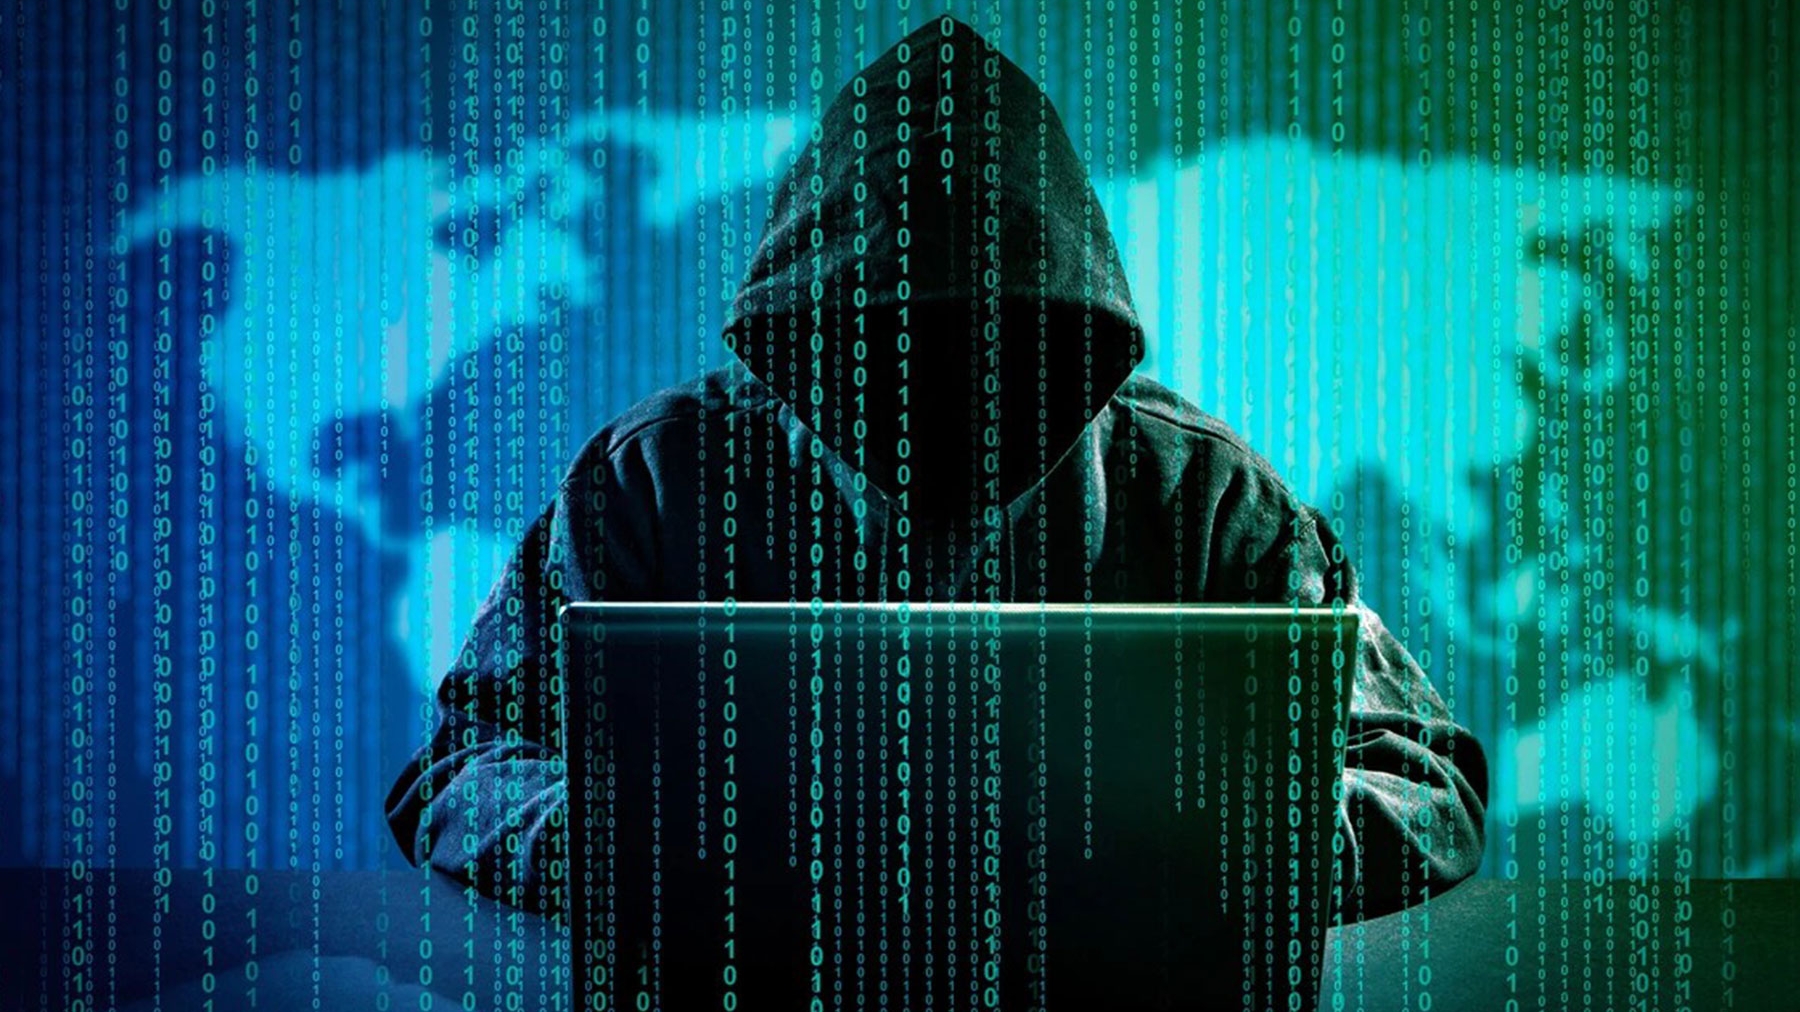 It is not yet known if the data fell into the hands of cybercriminals, but the vulnerability exposed millions of data.